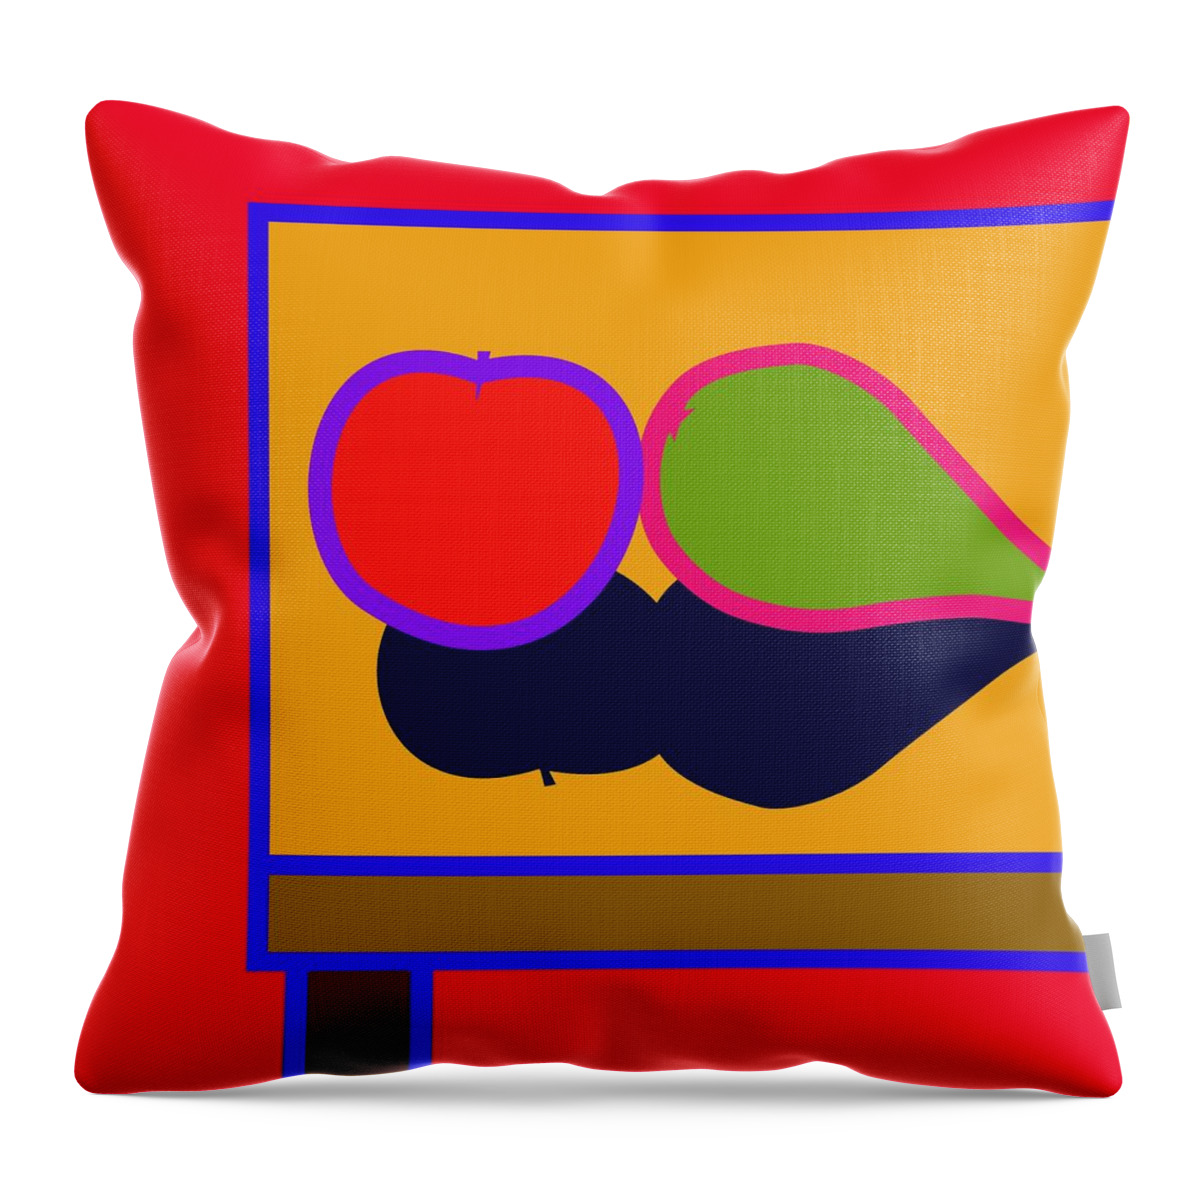 Apple Throw Pillow featuring the digital art Apple and Pear by Fatline Graphic Art